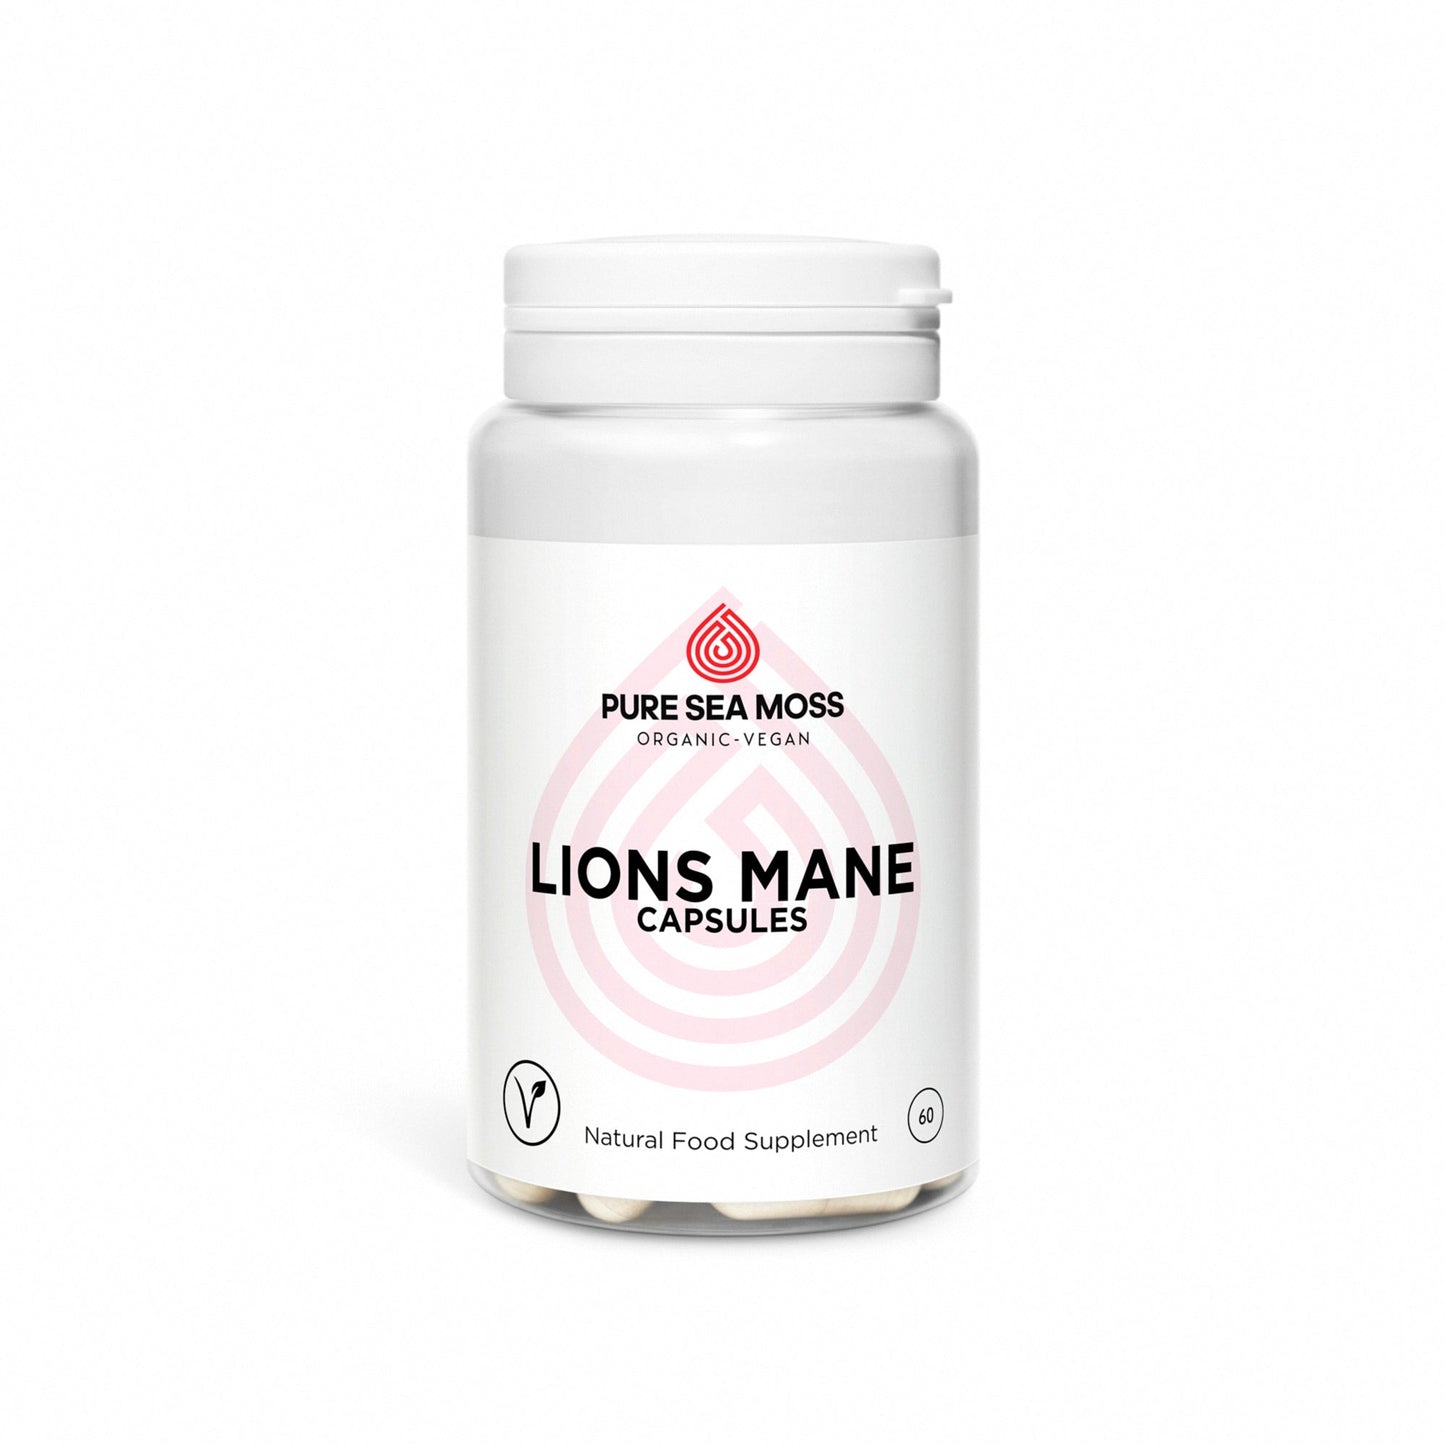 Best Lions Mane Capsules (60) by pure sea moss uk 